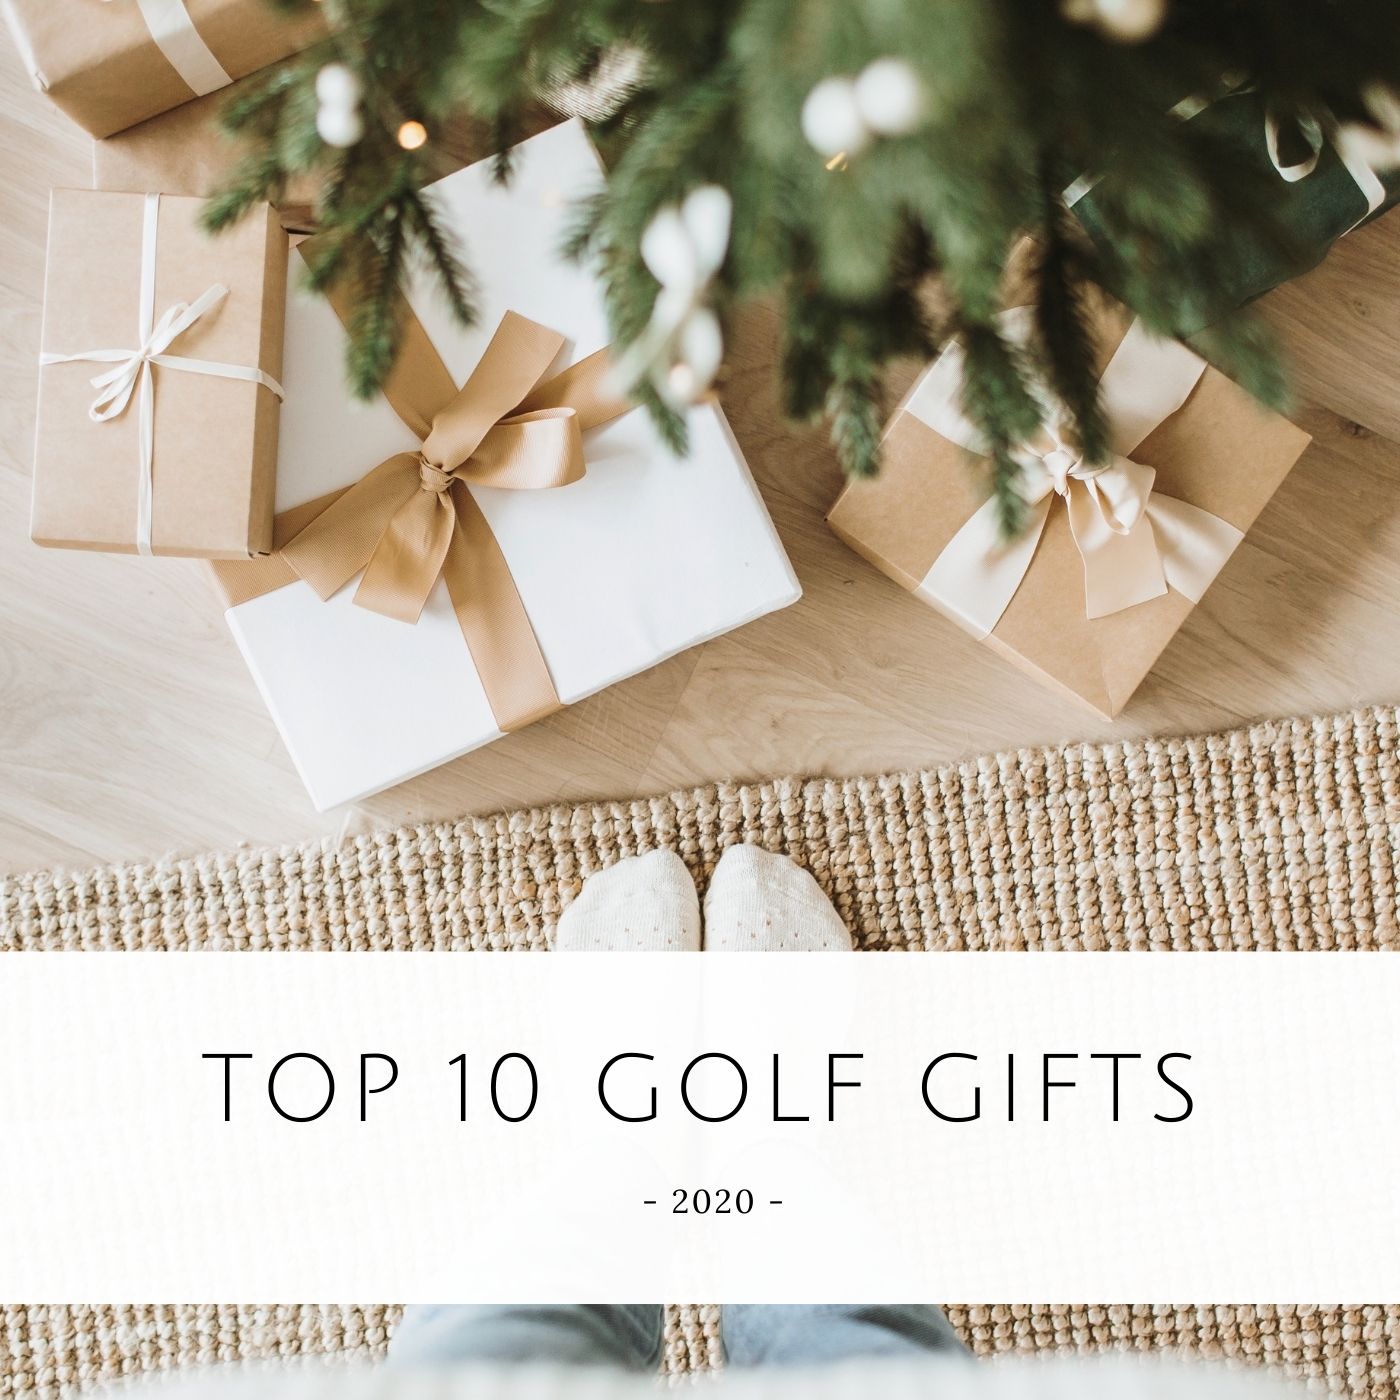 Top 10 Golf Gifts of 2020